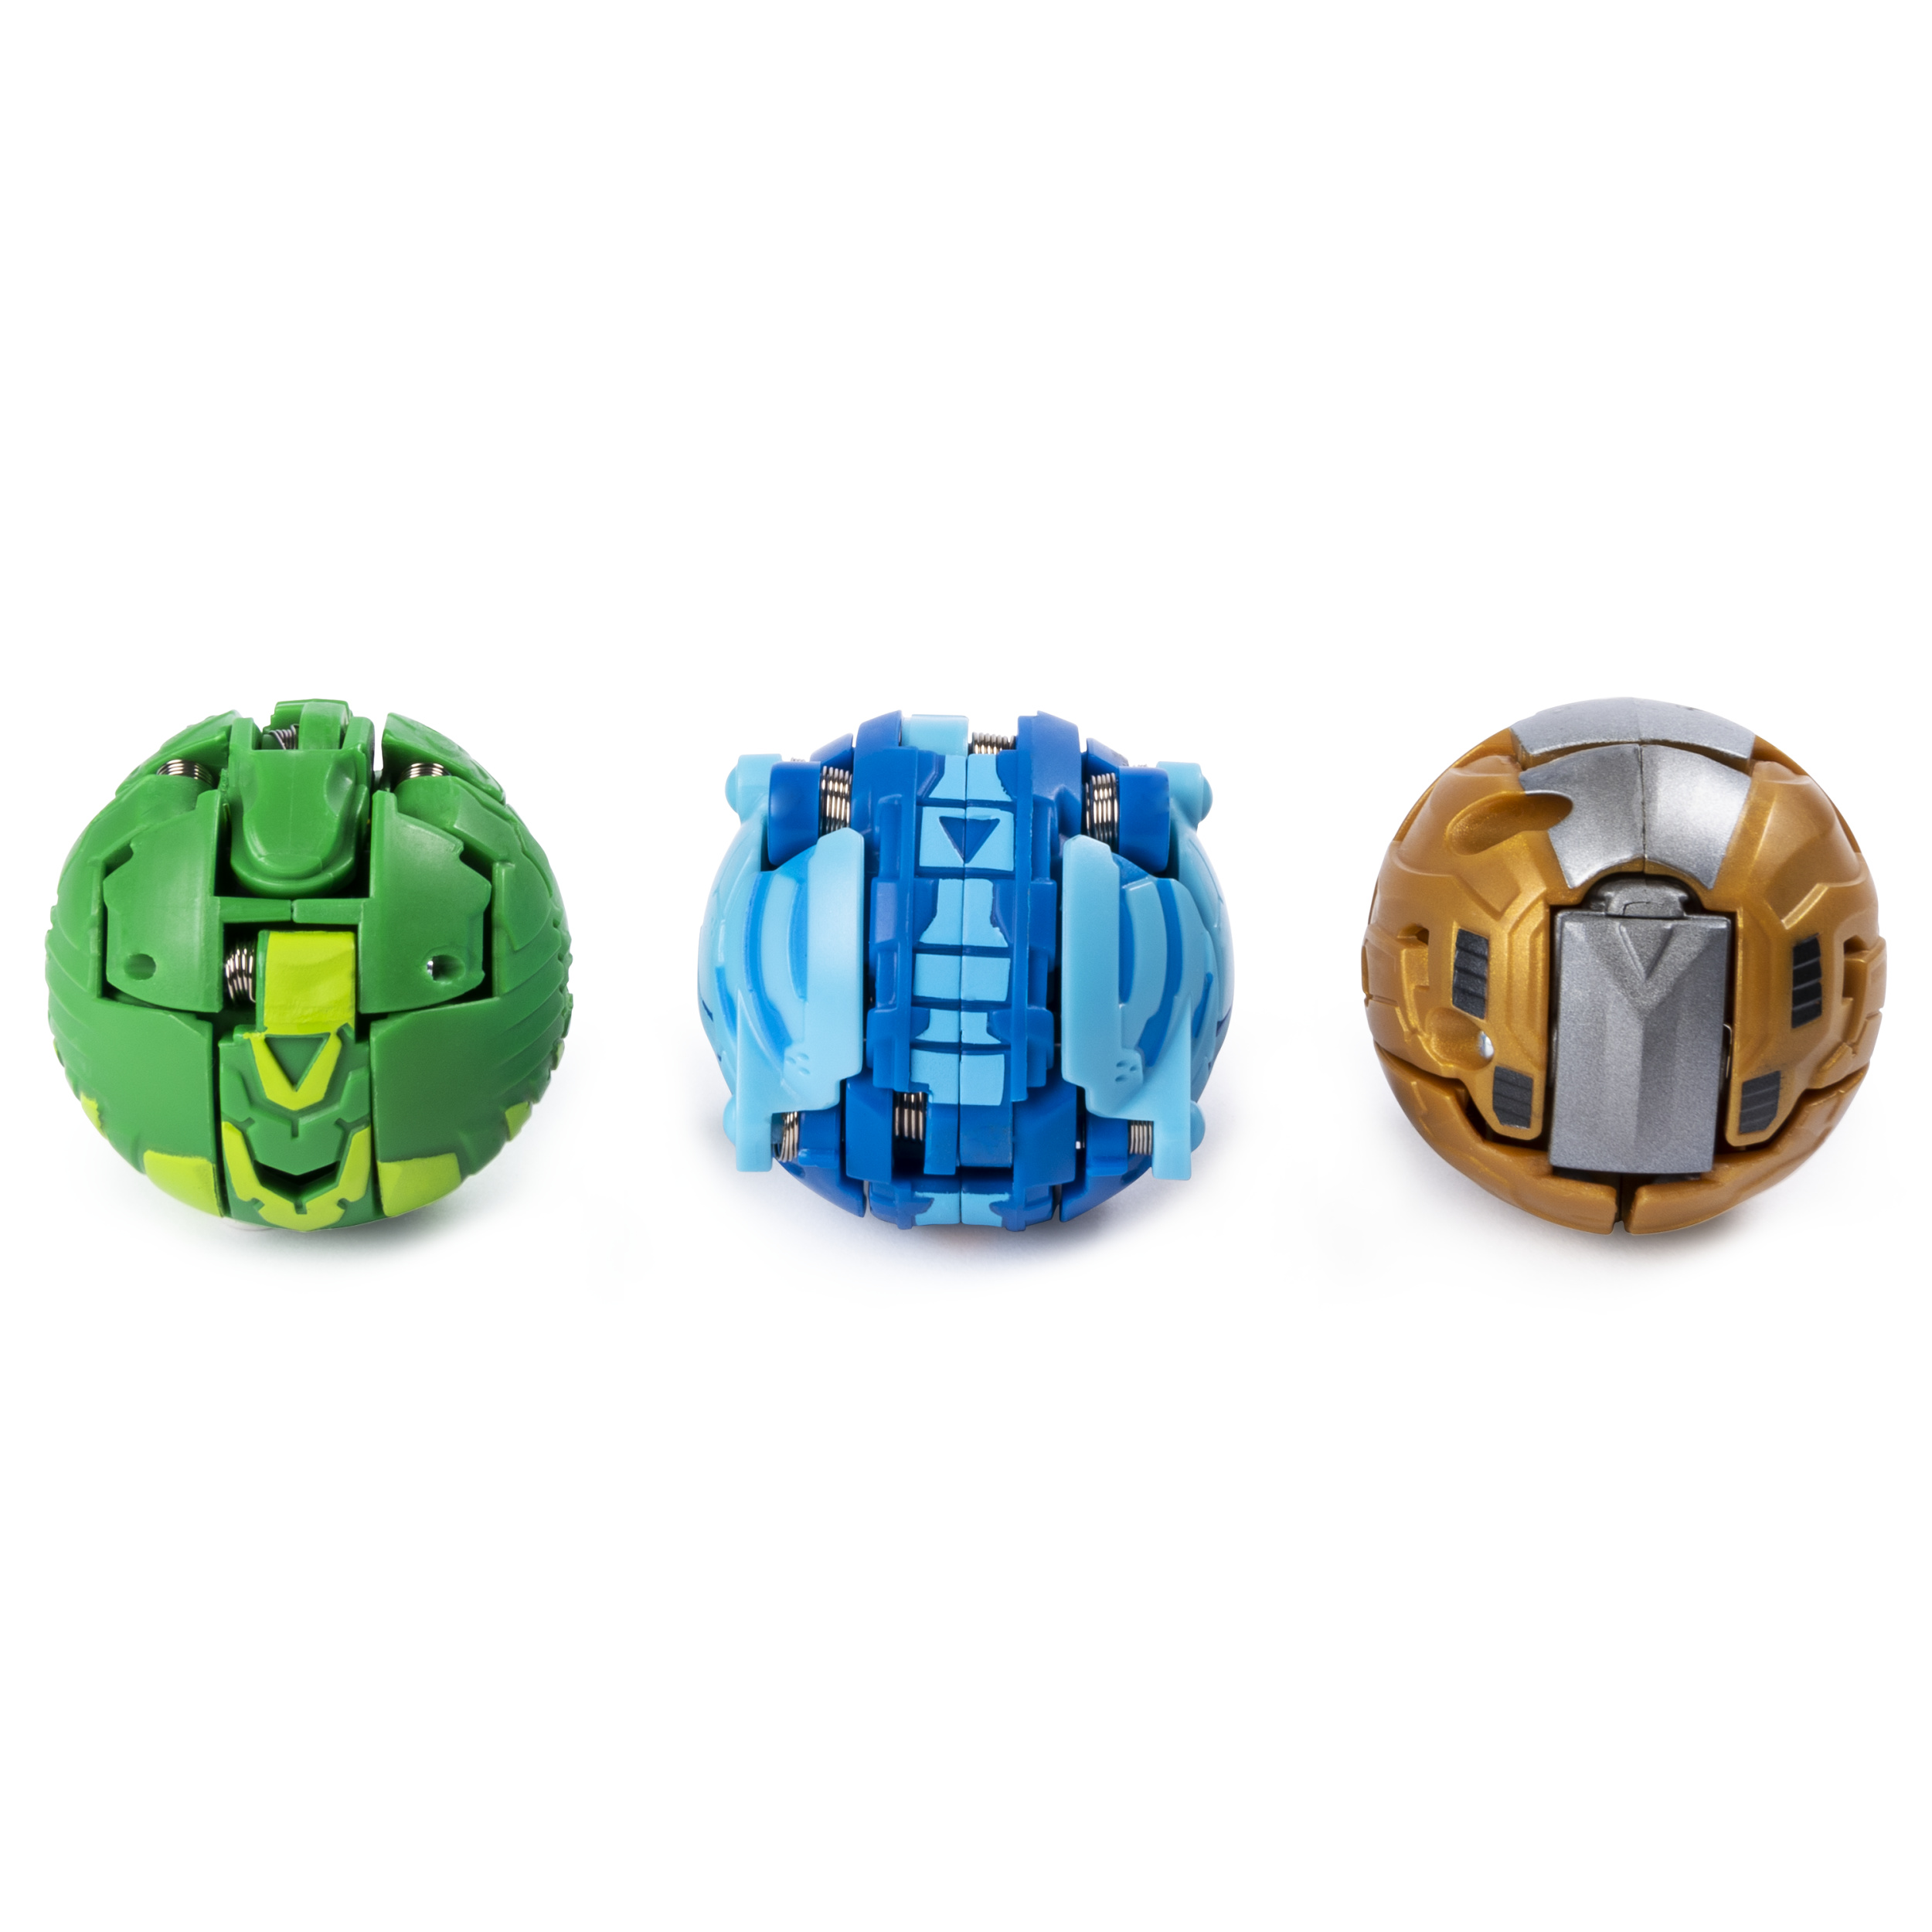 Bakugan Starter Pack 3-Pack, Serpenteze, Collectible Action Figures, for Ages 6 and Up - image 5 of 9